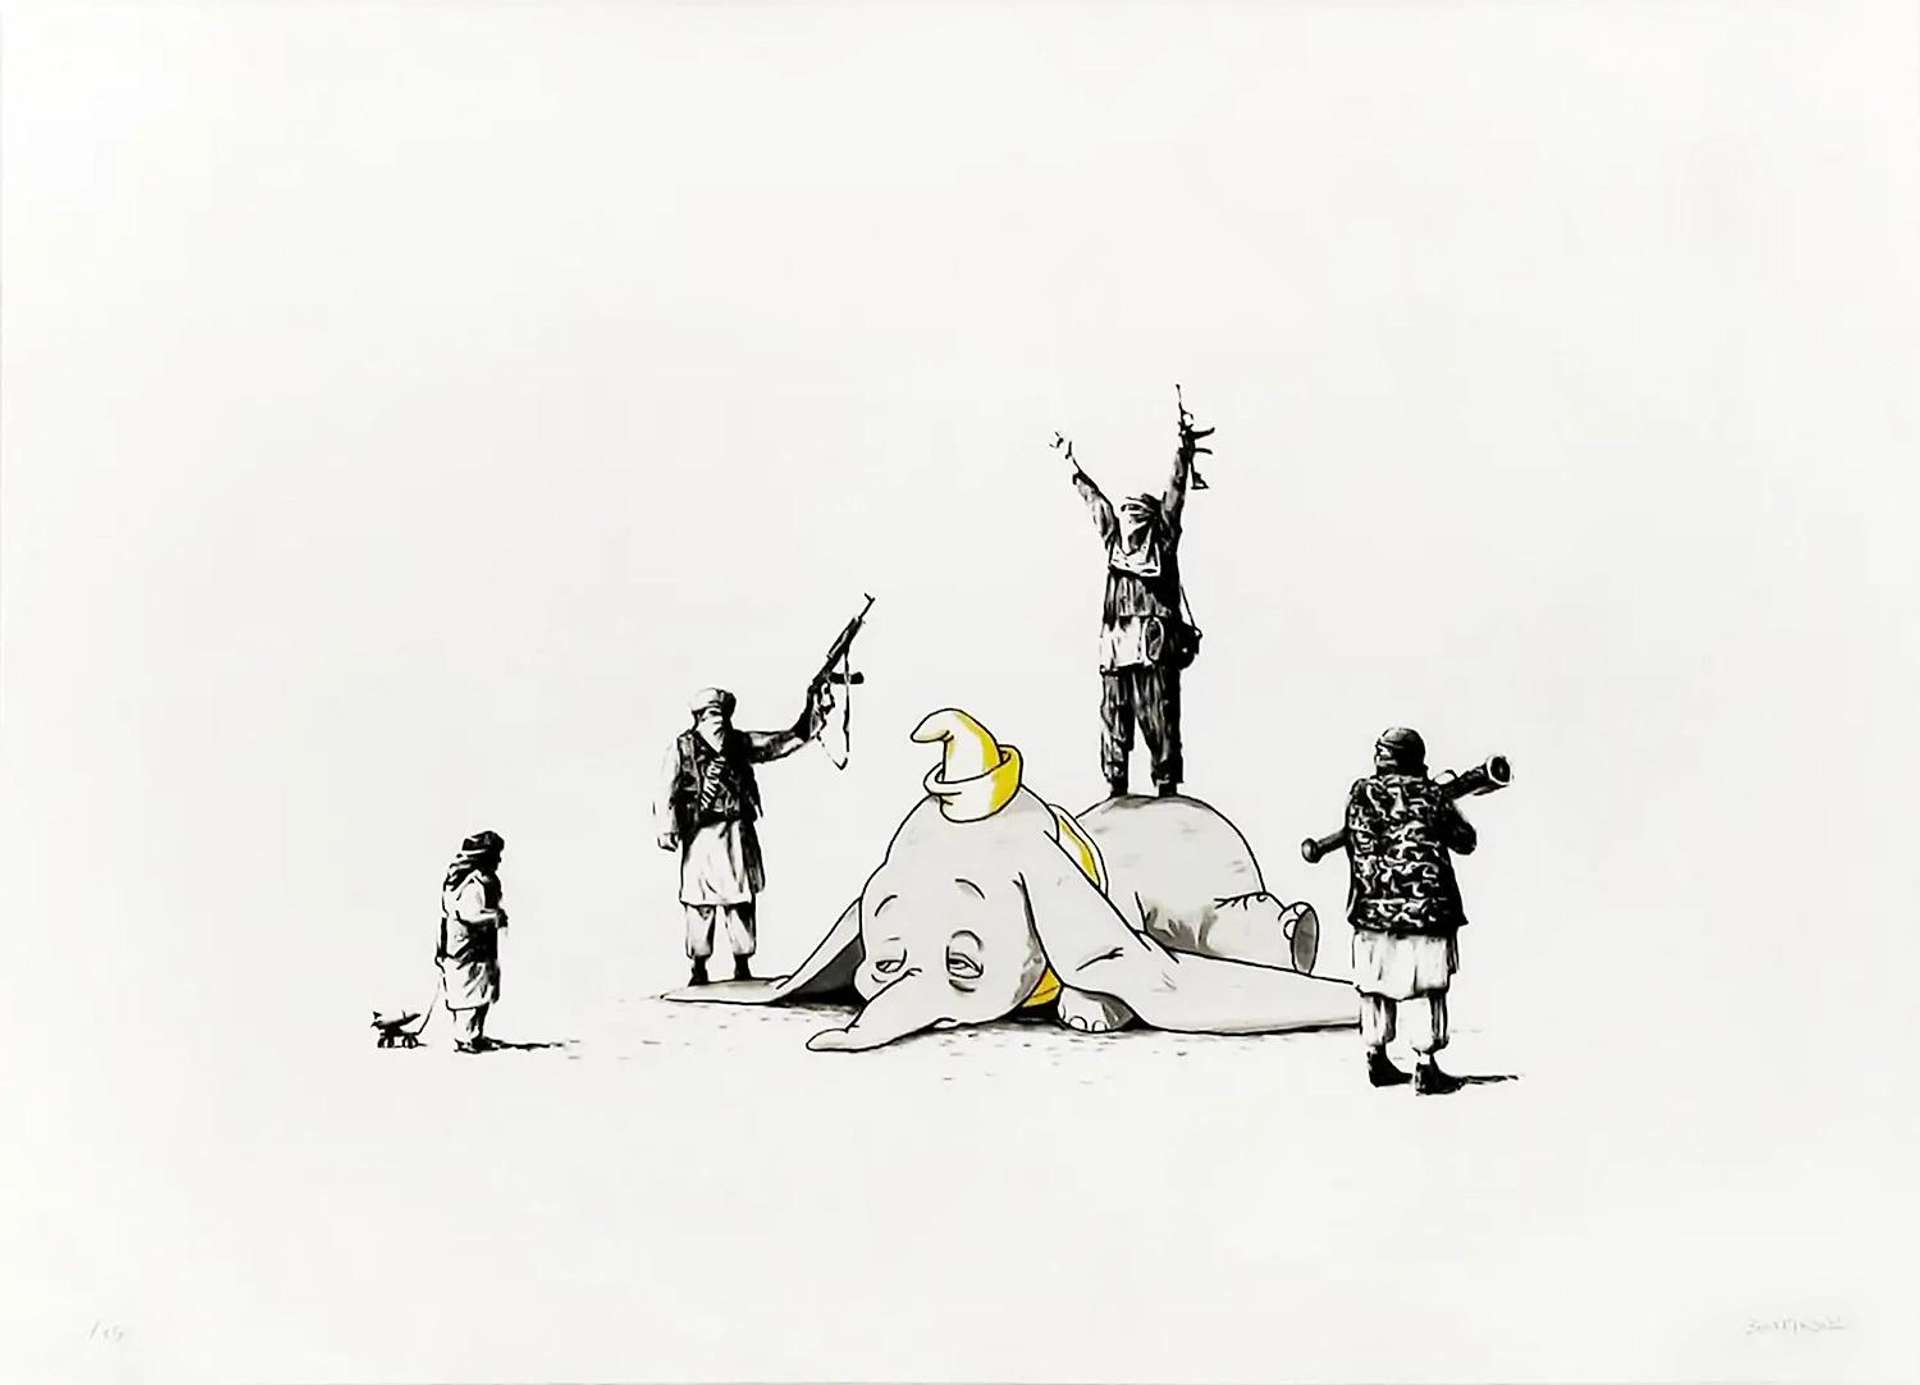 A screenprint by Banksy depicting the cartoon Dumbo at the centre of the composition, who is being trampled by armed miltants.